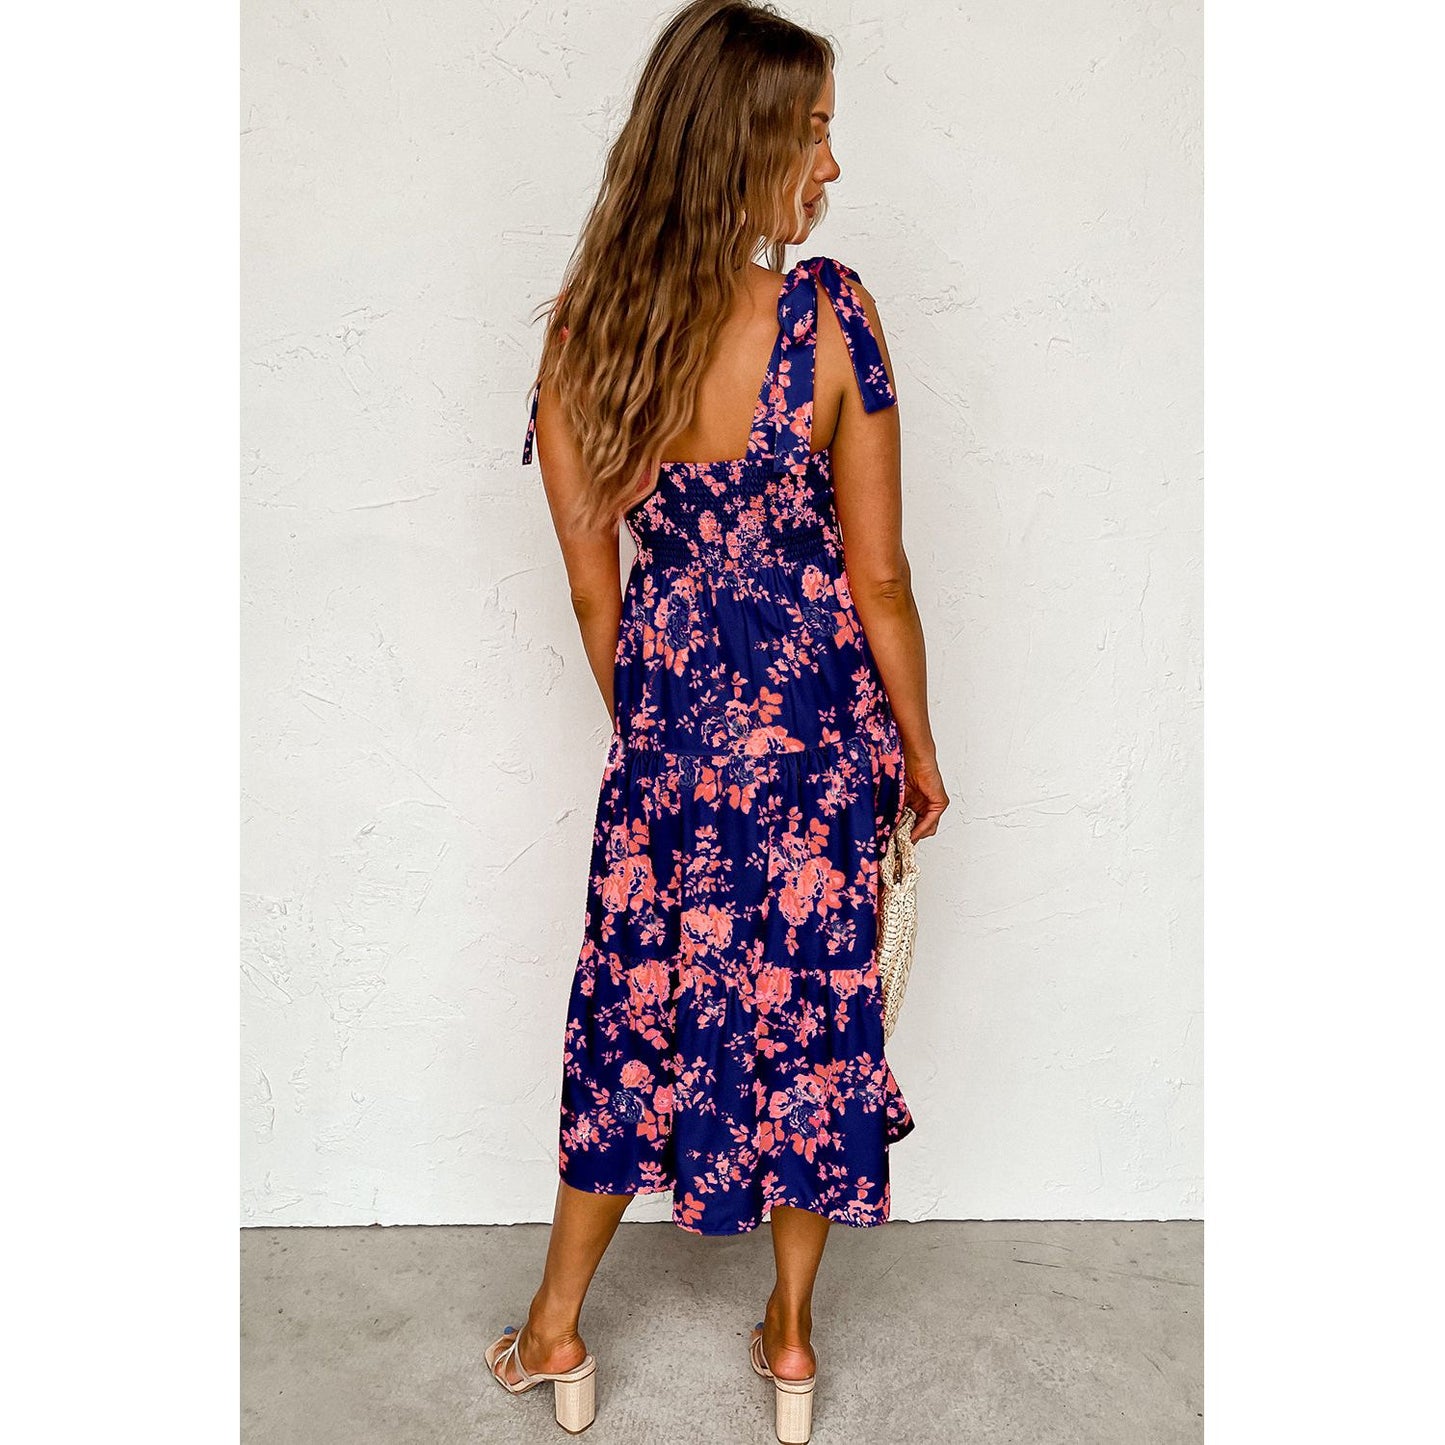 Nothing To Lose Blue Tie Shoulder Straps Tiered Floral Dress